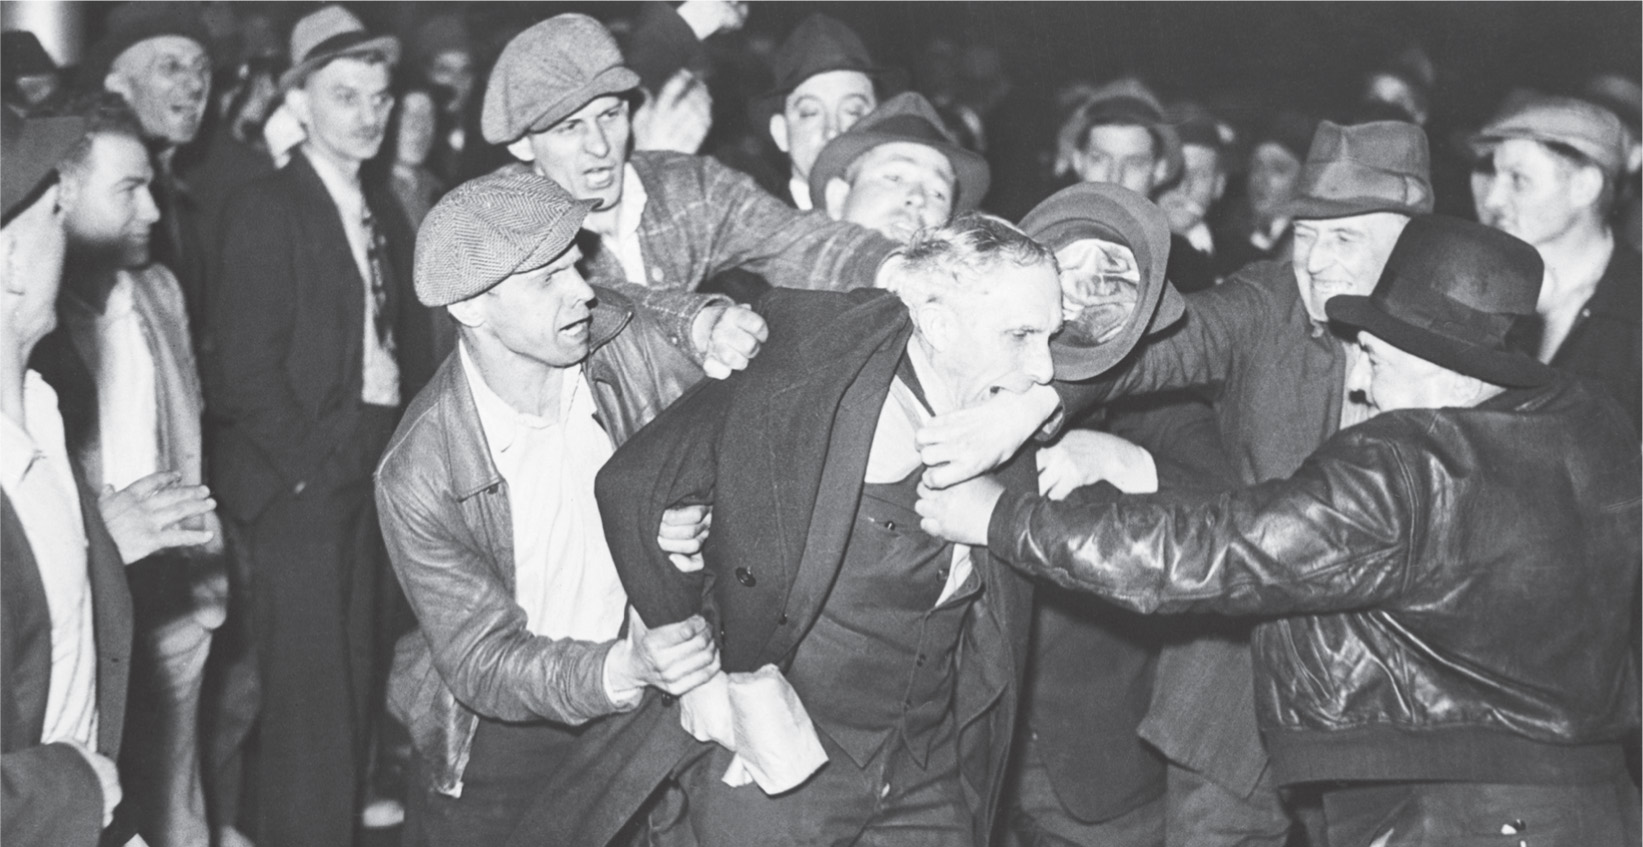 Photo: strikers prevent a man from crossing their picket line